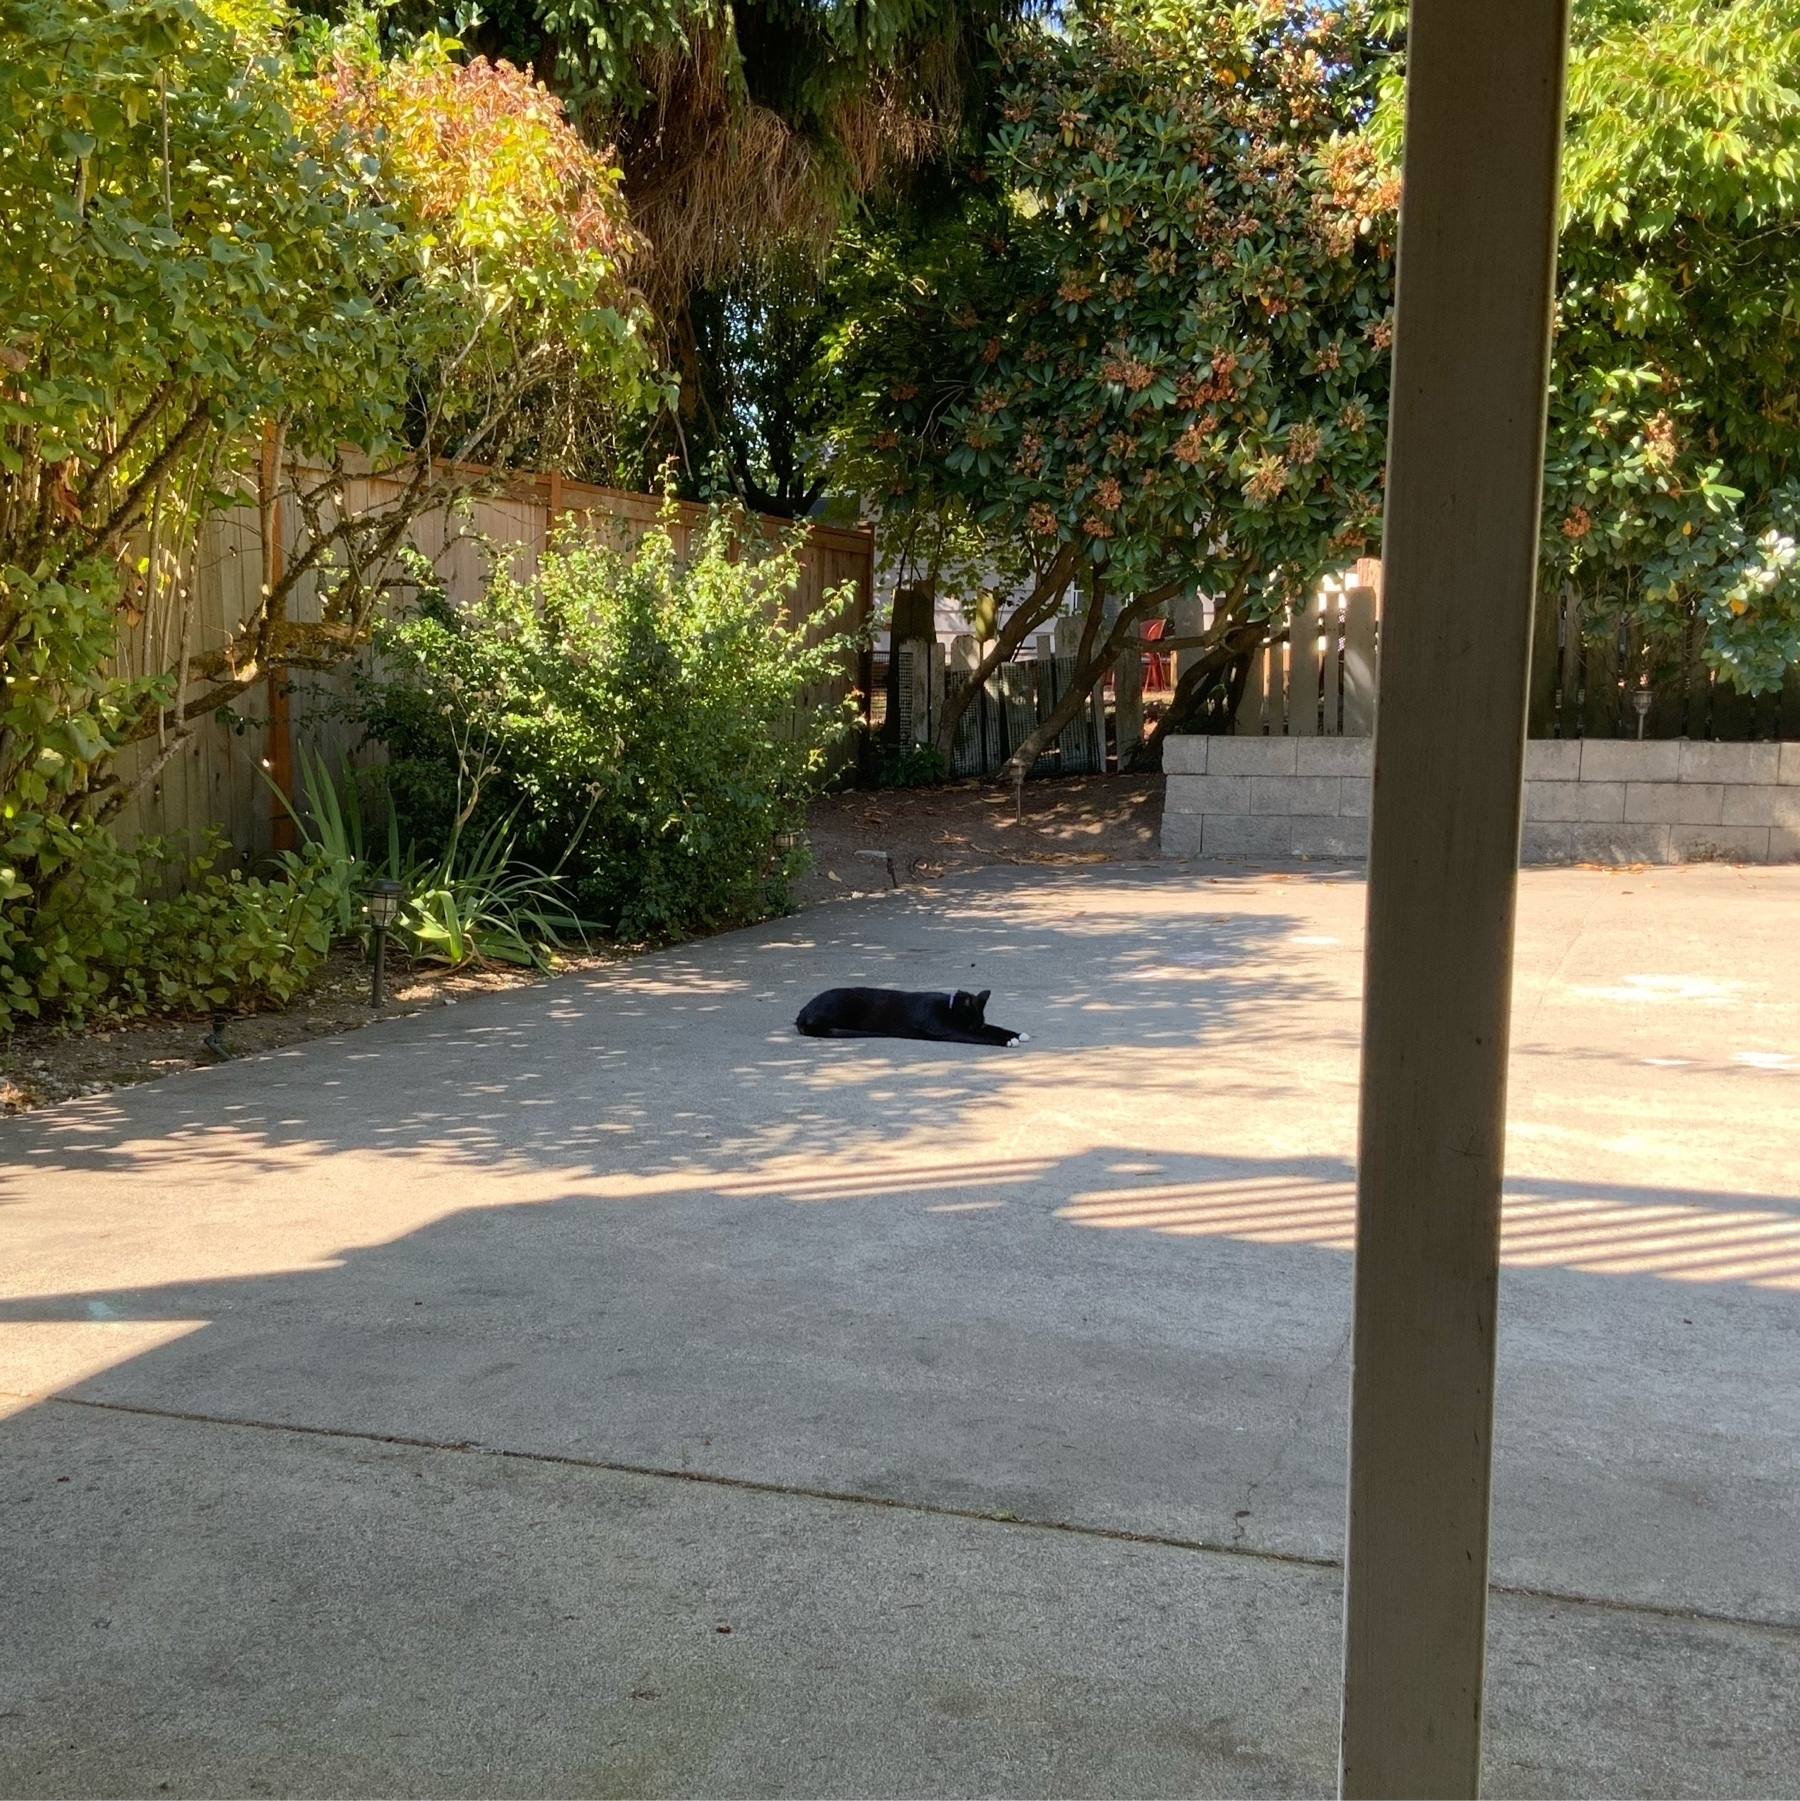 Black (tuxedo) cat sprawled out on the concrete in the shade of a bush